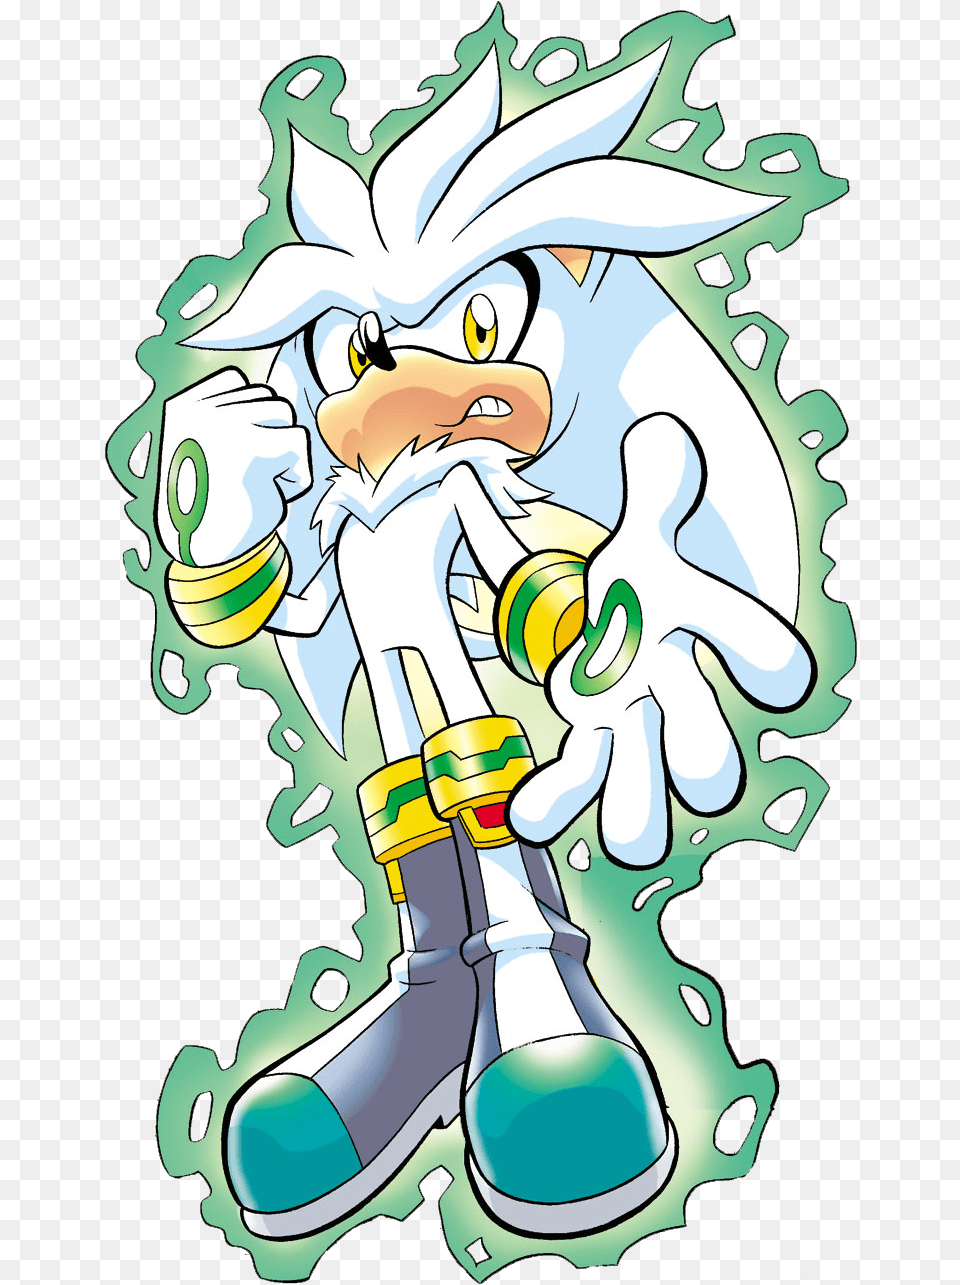 No Caption Provided Silver The Hedgehog, Book, Comics, Publication, Baby Png Image